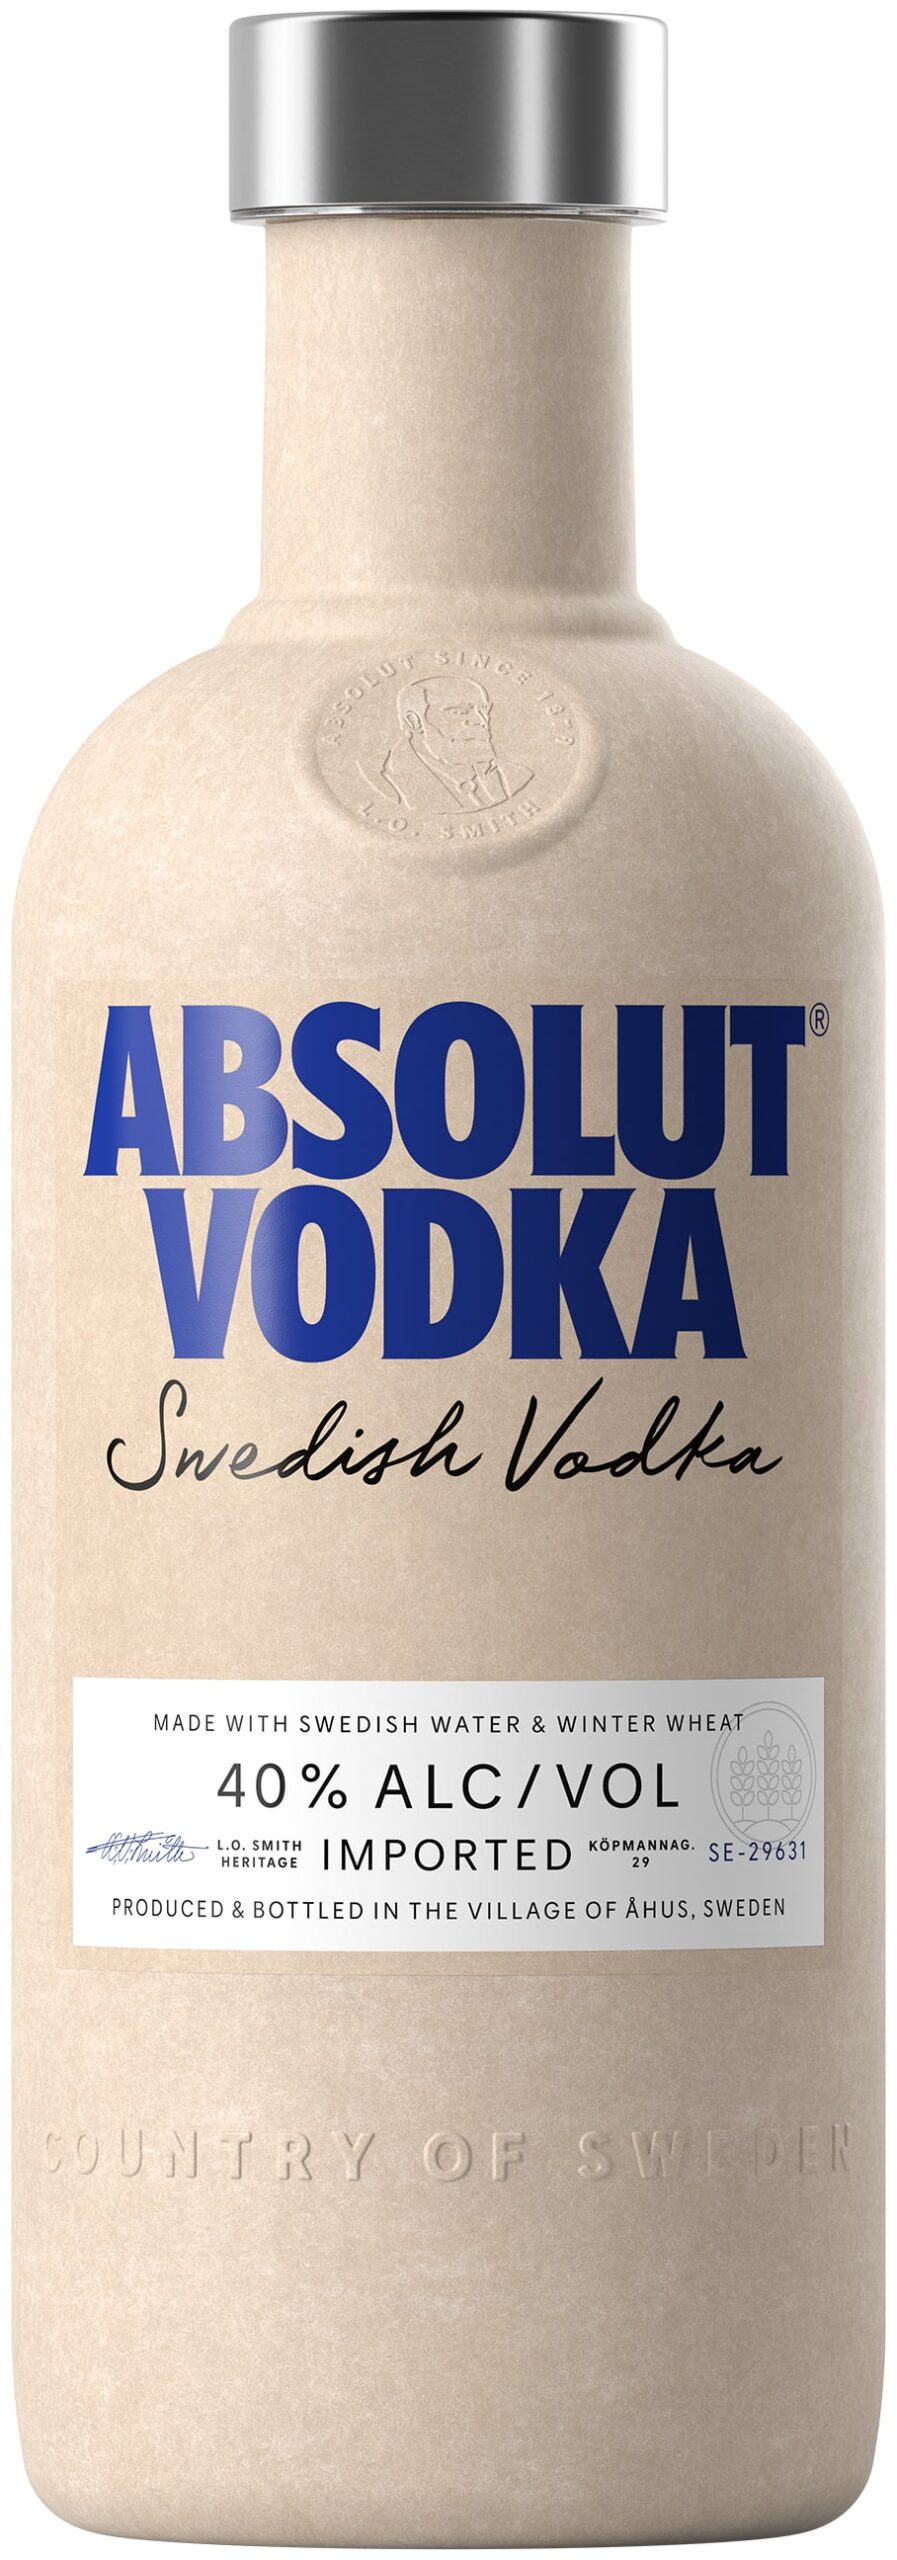 The Absolut paper bottle